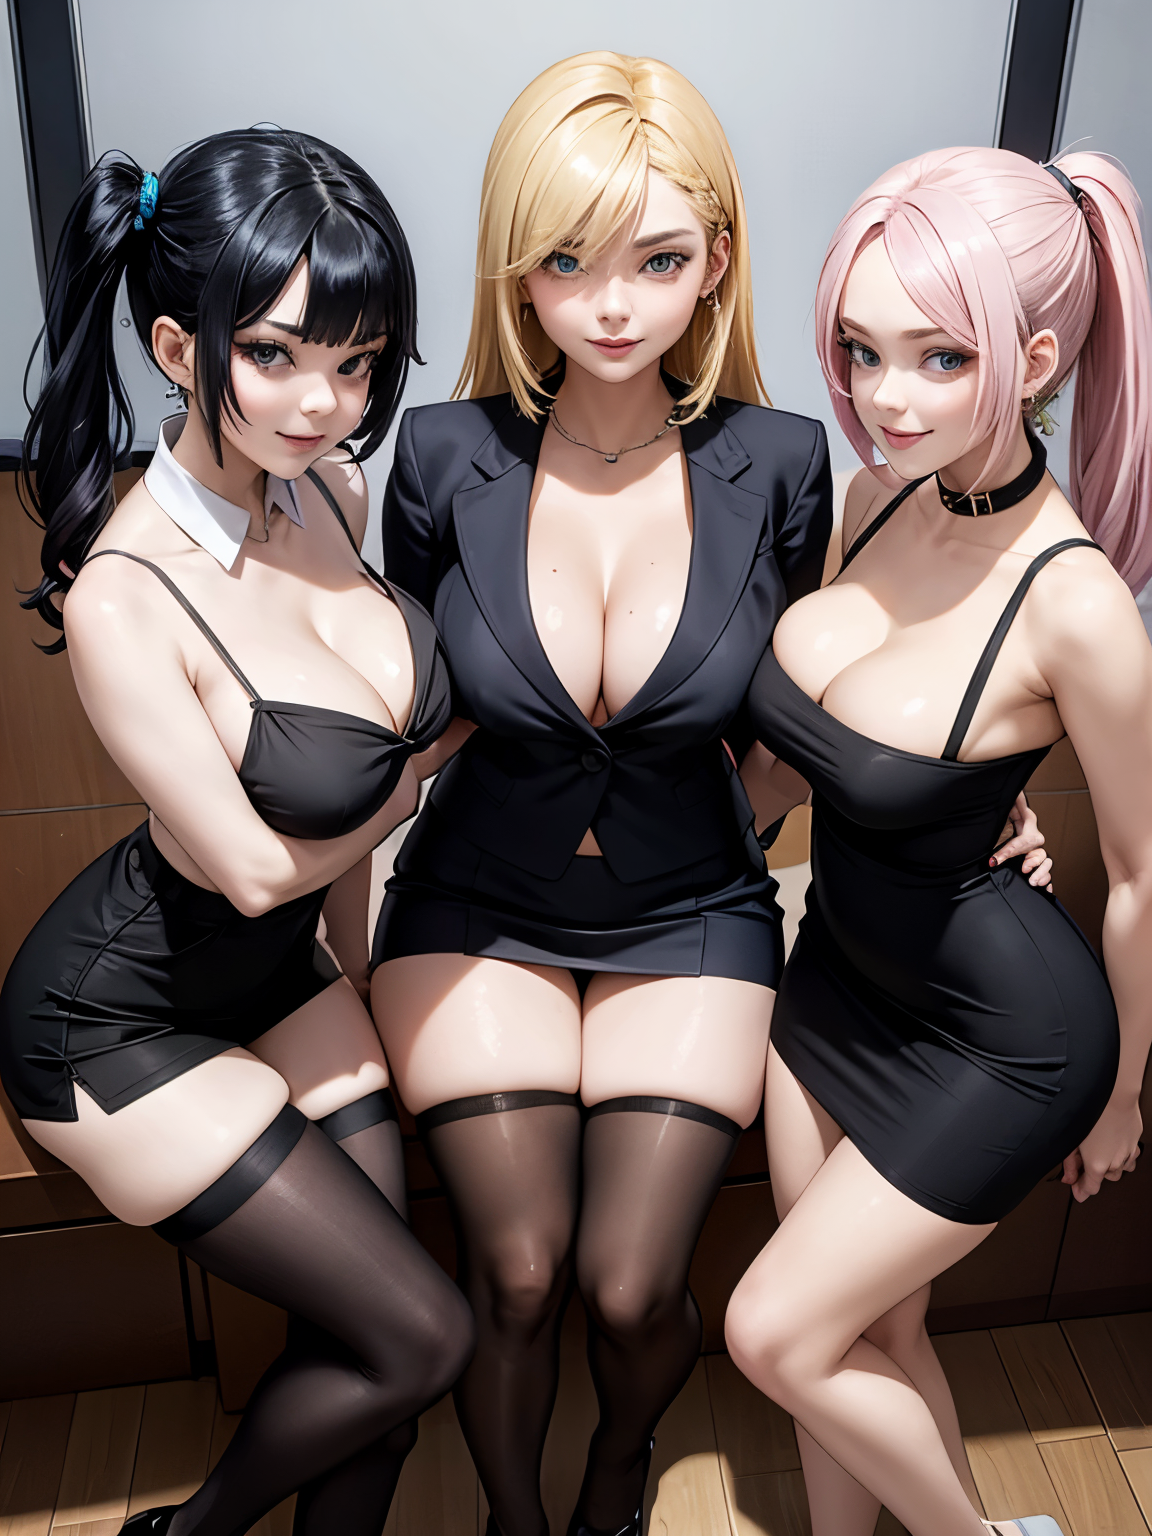 Roleplay,Multiple Characters,Female,Scenario,Romance,Huge Breasts,Submissive,You hired 3 secretaries to help you with your tasks